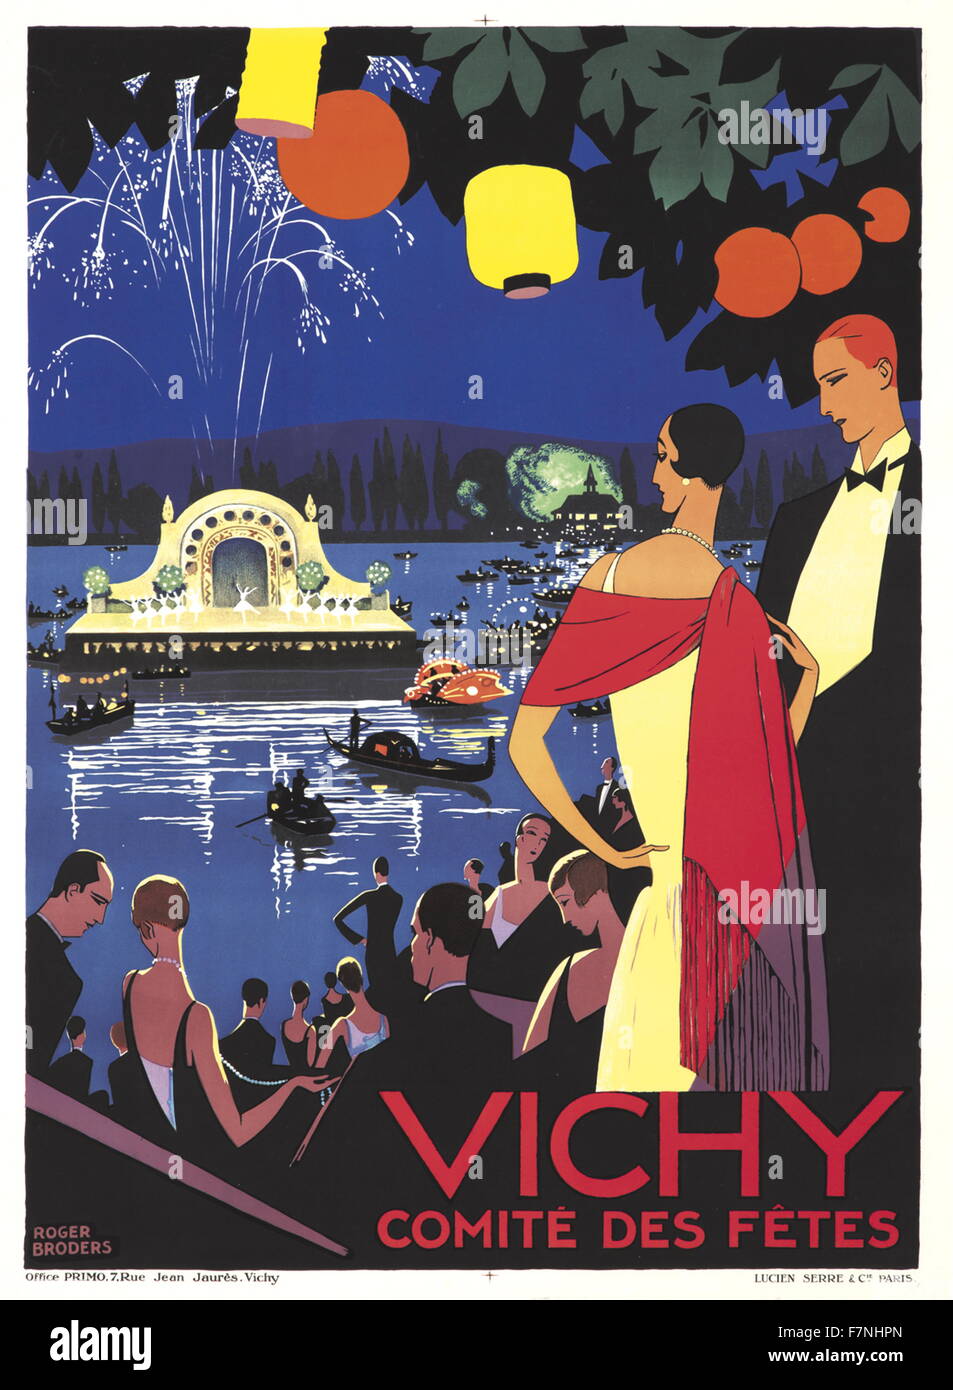 Giclee pint titled 'Vichy Comite des Fetes' by Roger Broders (1883-1953) French illustrator and artist. Dated 1926 Stock Photo